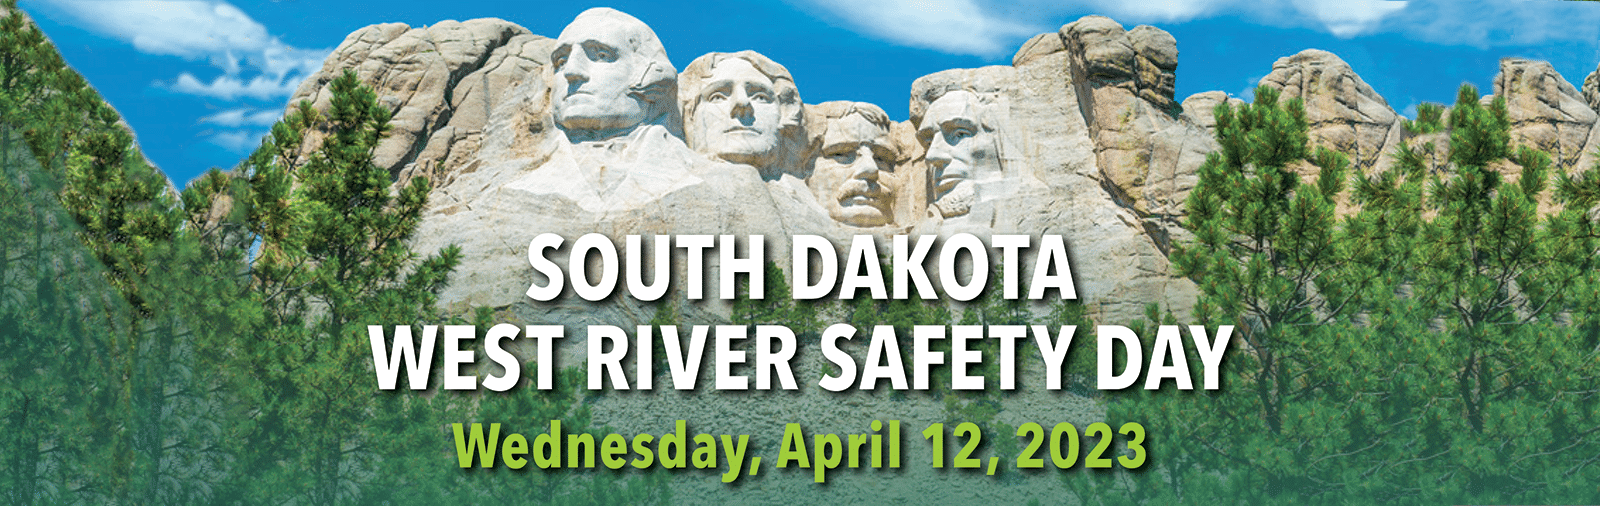 banner for South Dakota West River Safety Day